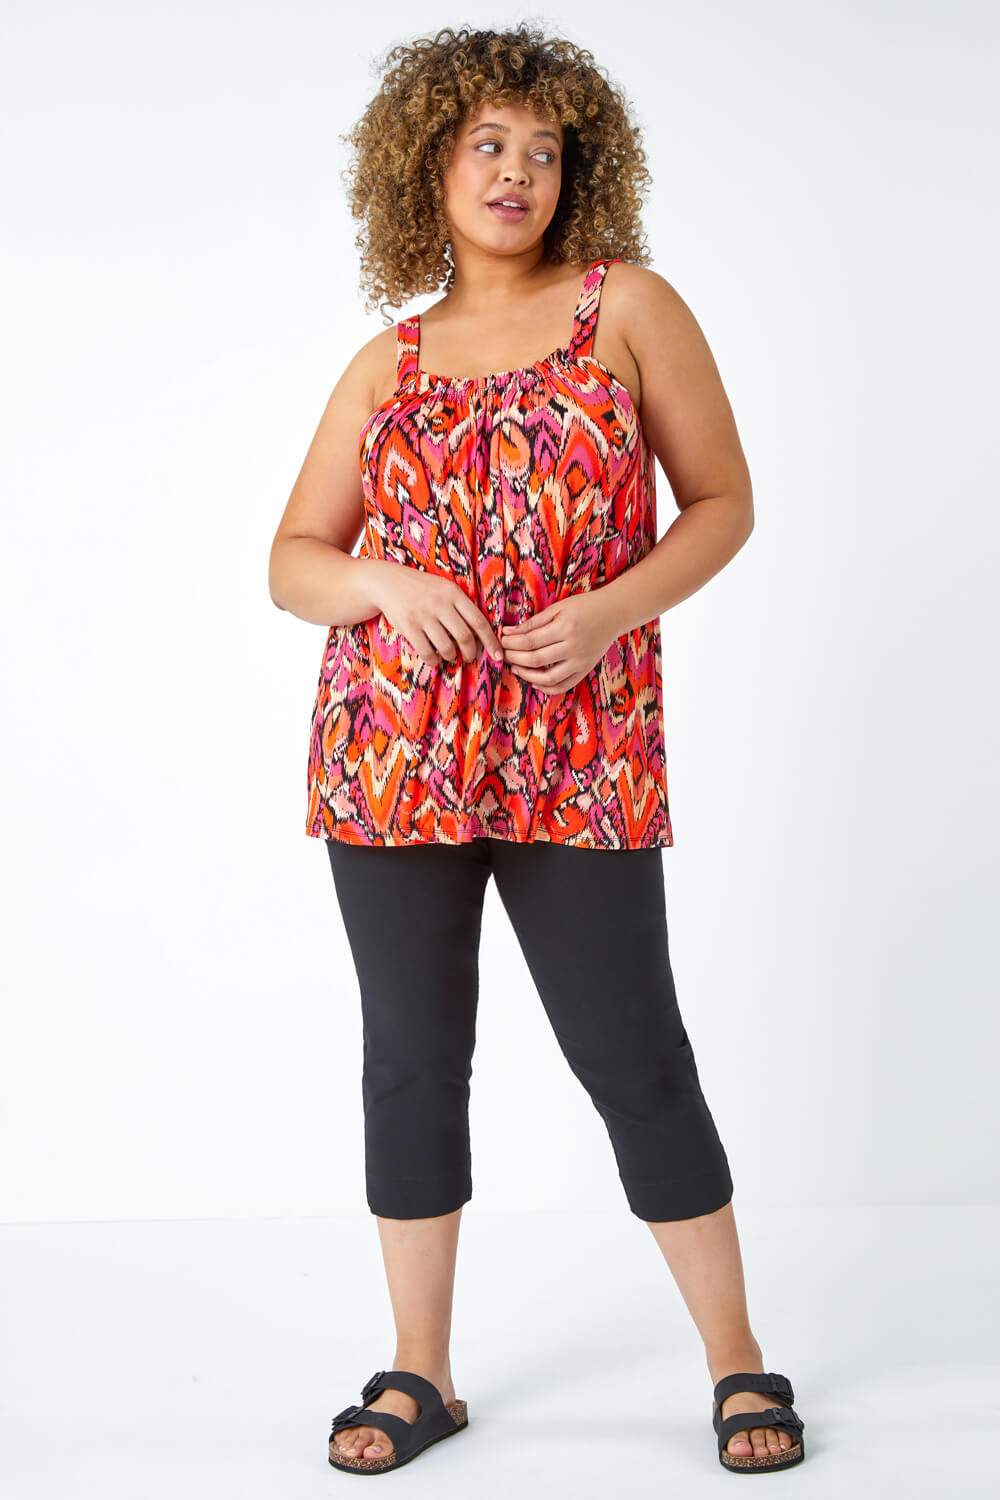 ORANGE Curve Aztec Print Ruched Stretch Top, Image 2 of 5